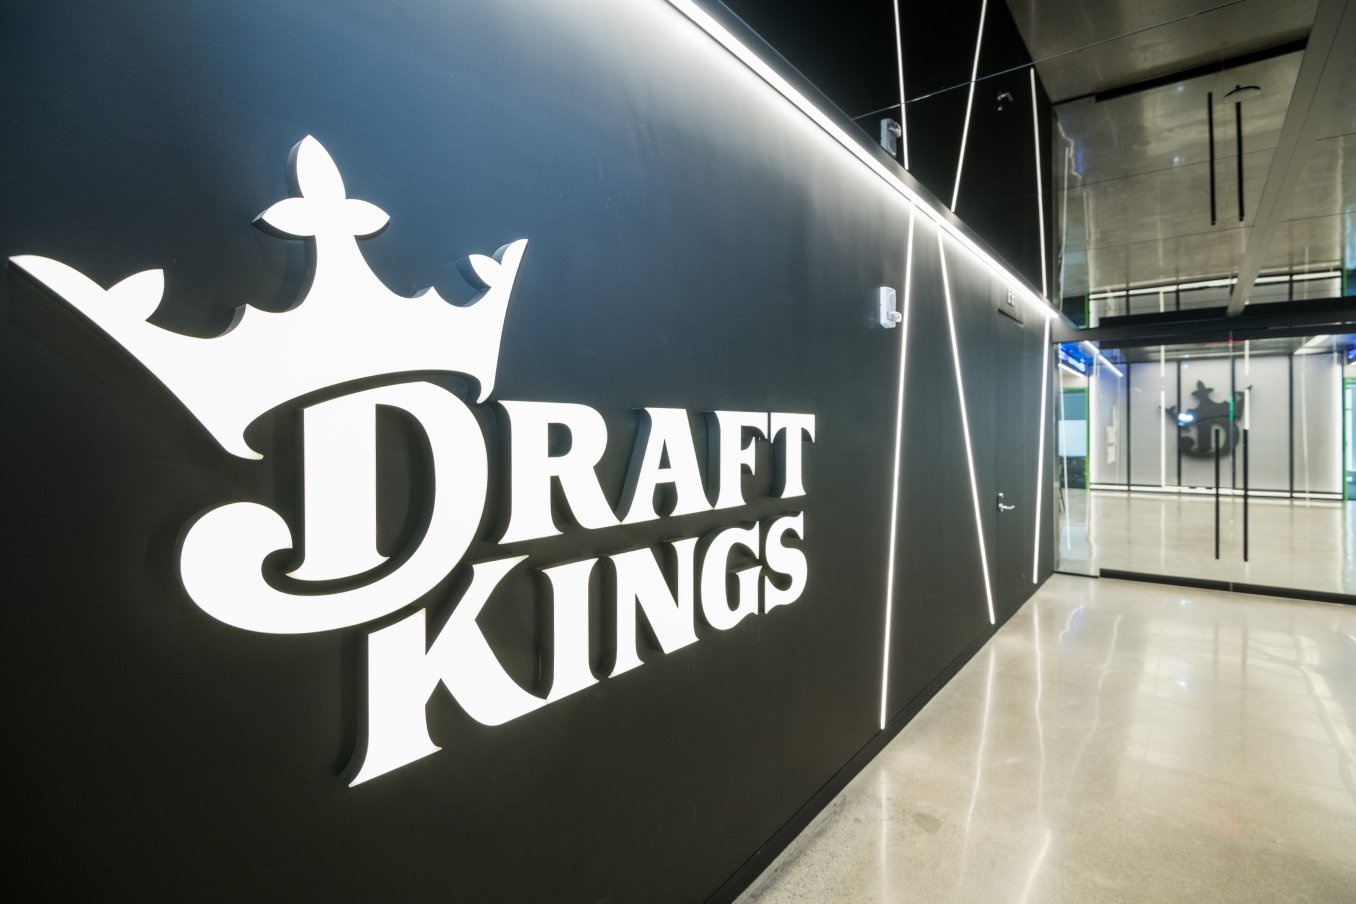 DraftKings' New Offices in Boston